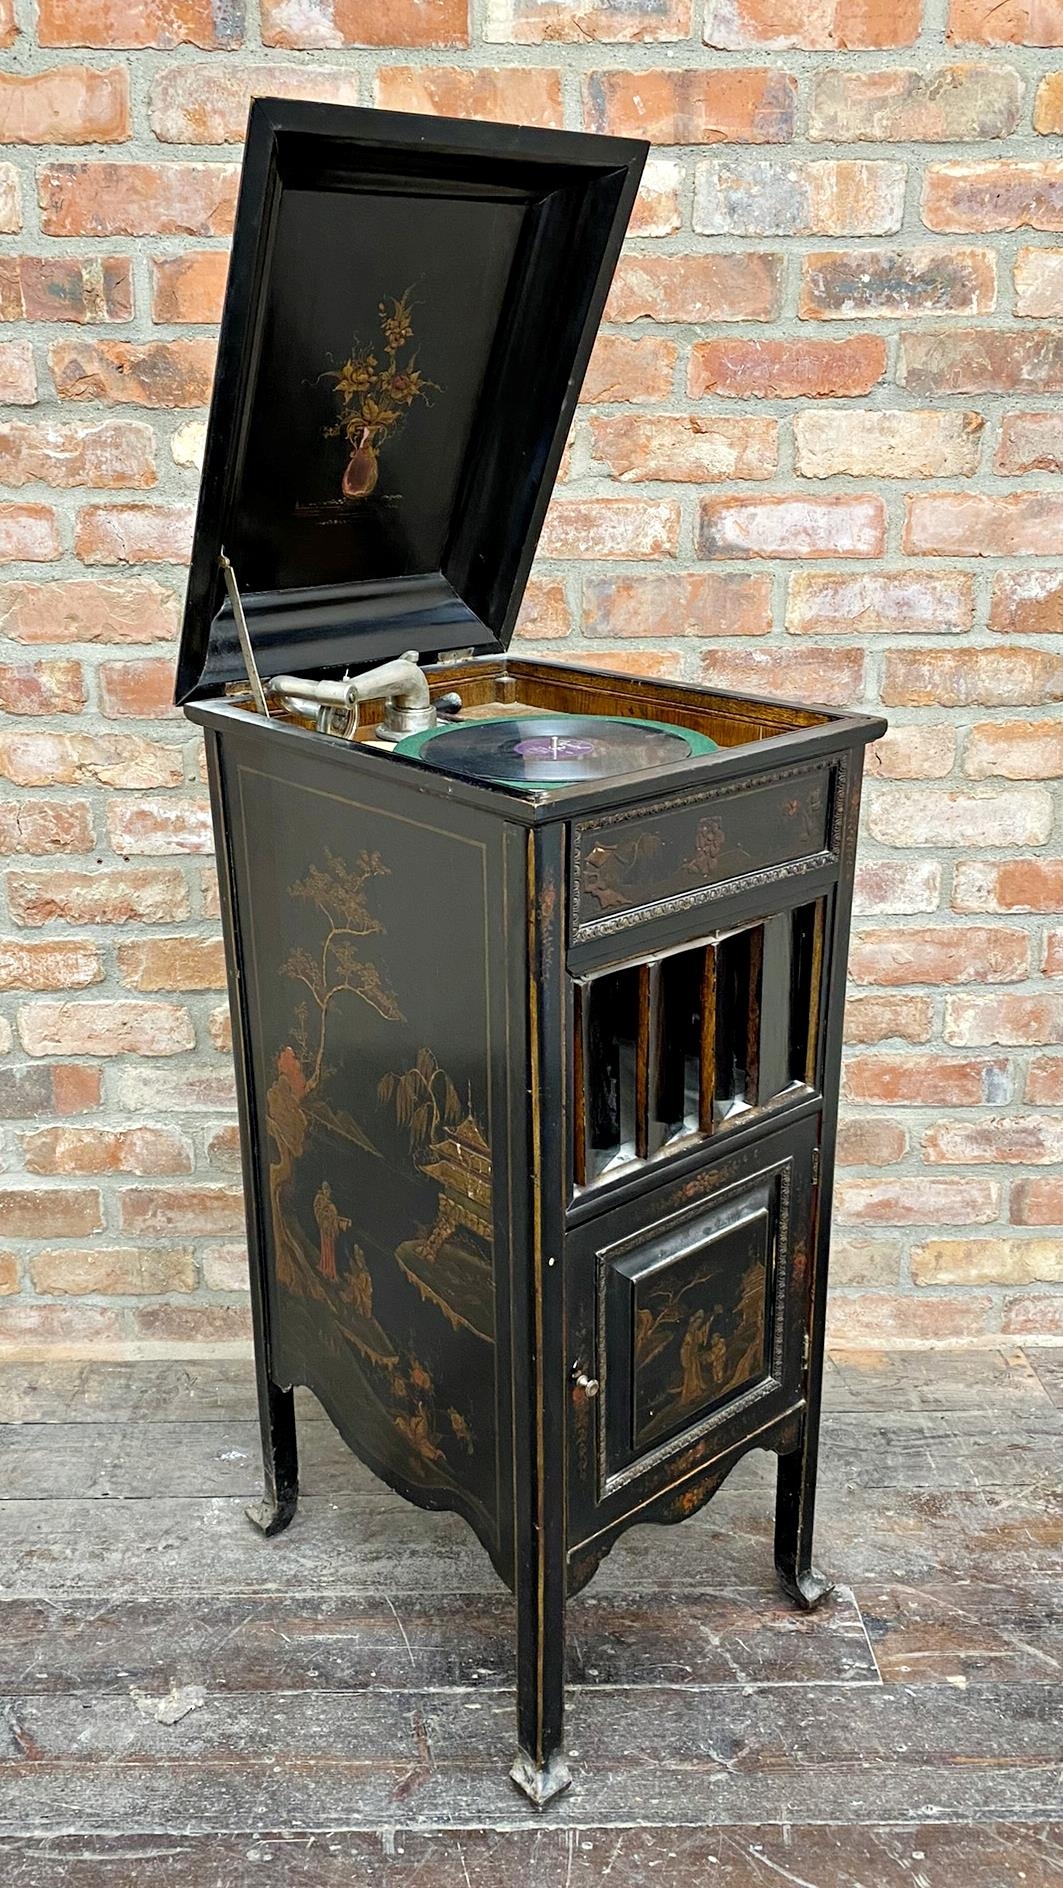 Rare and interesting upright gramophone with chinoiserie overlay decoration, various figures in